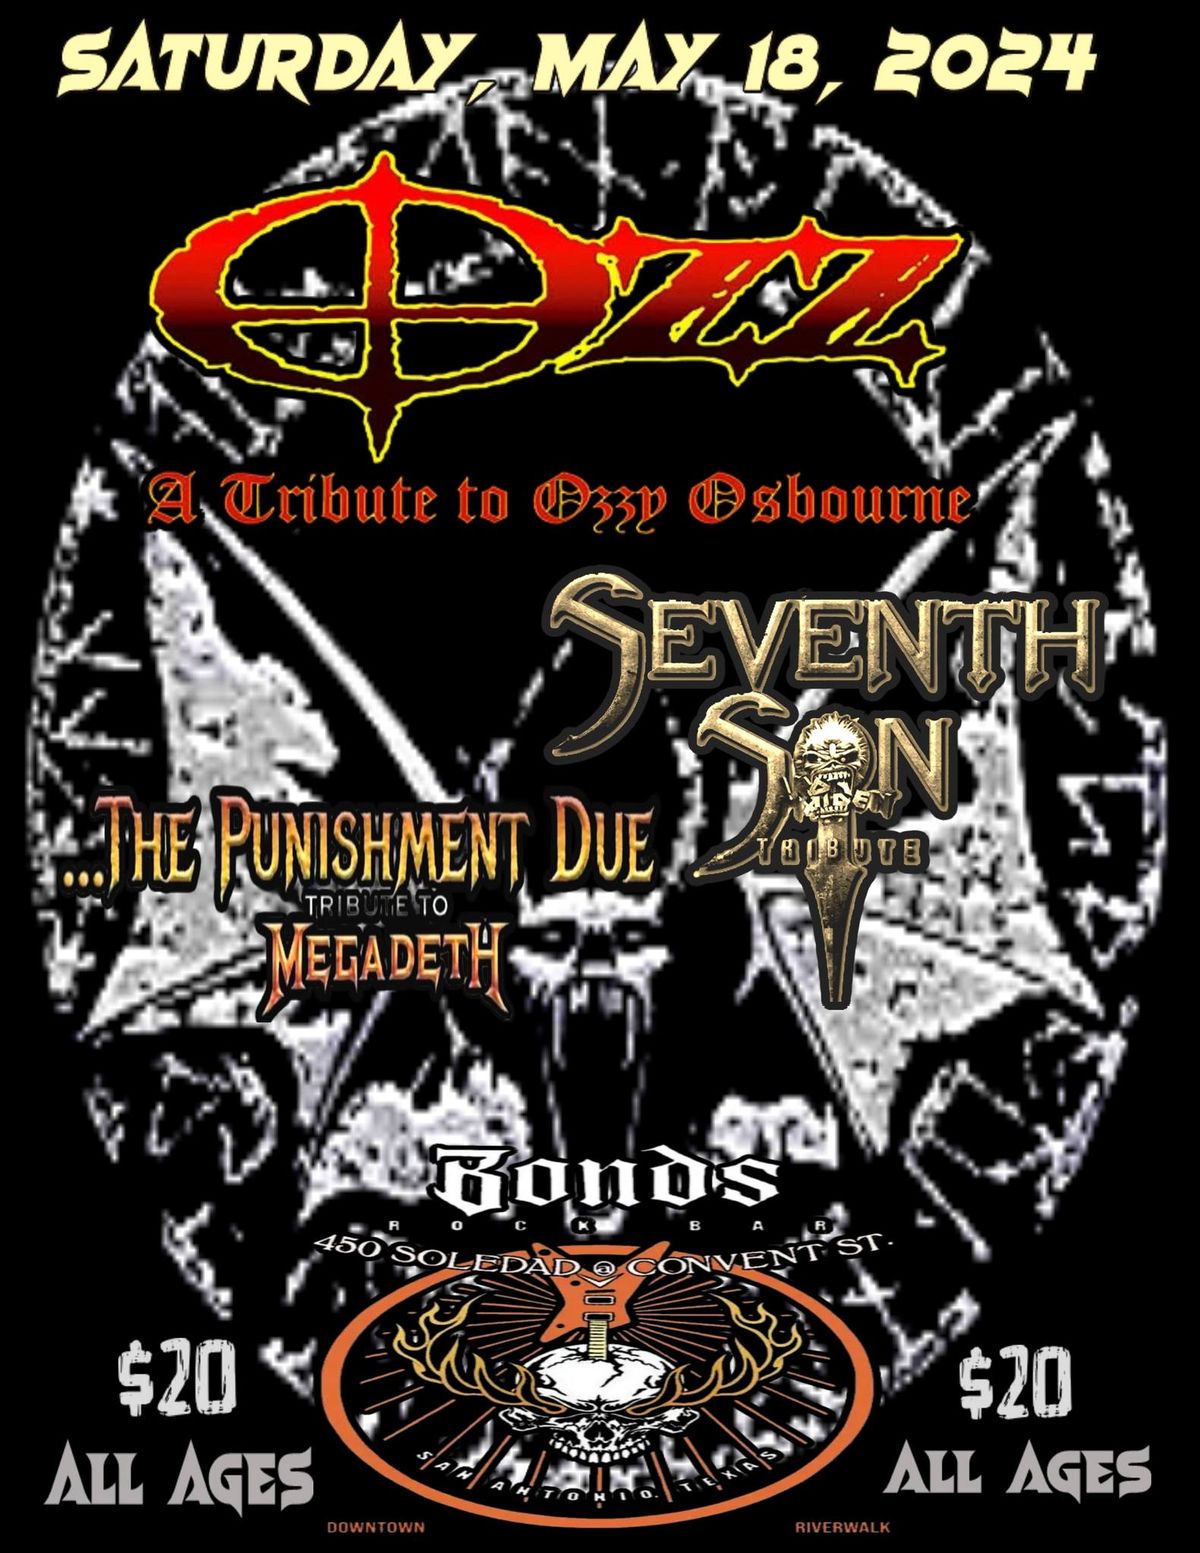 OZZ - A Tribute to Ozzy Osborne with Seventh Son and The Punishment Due